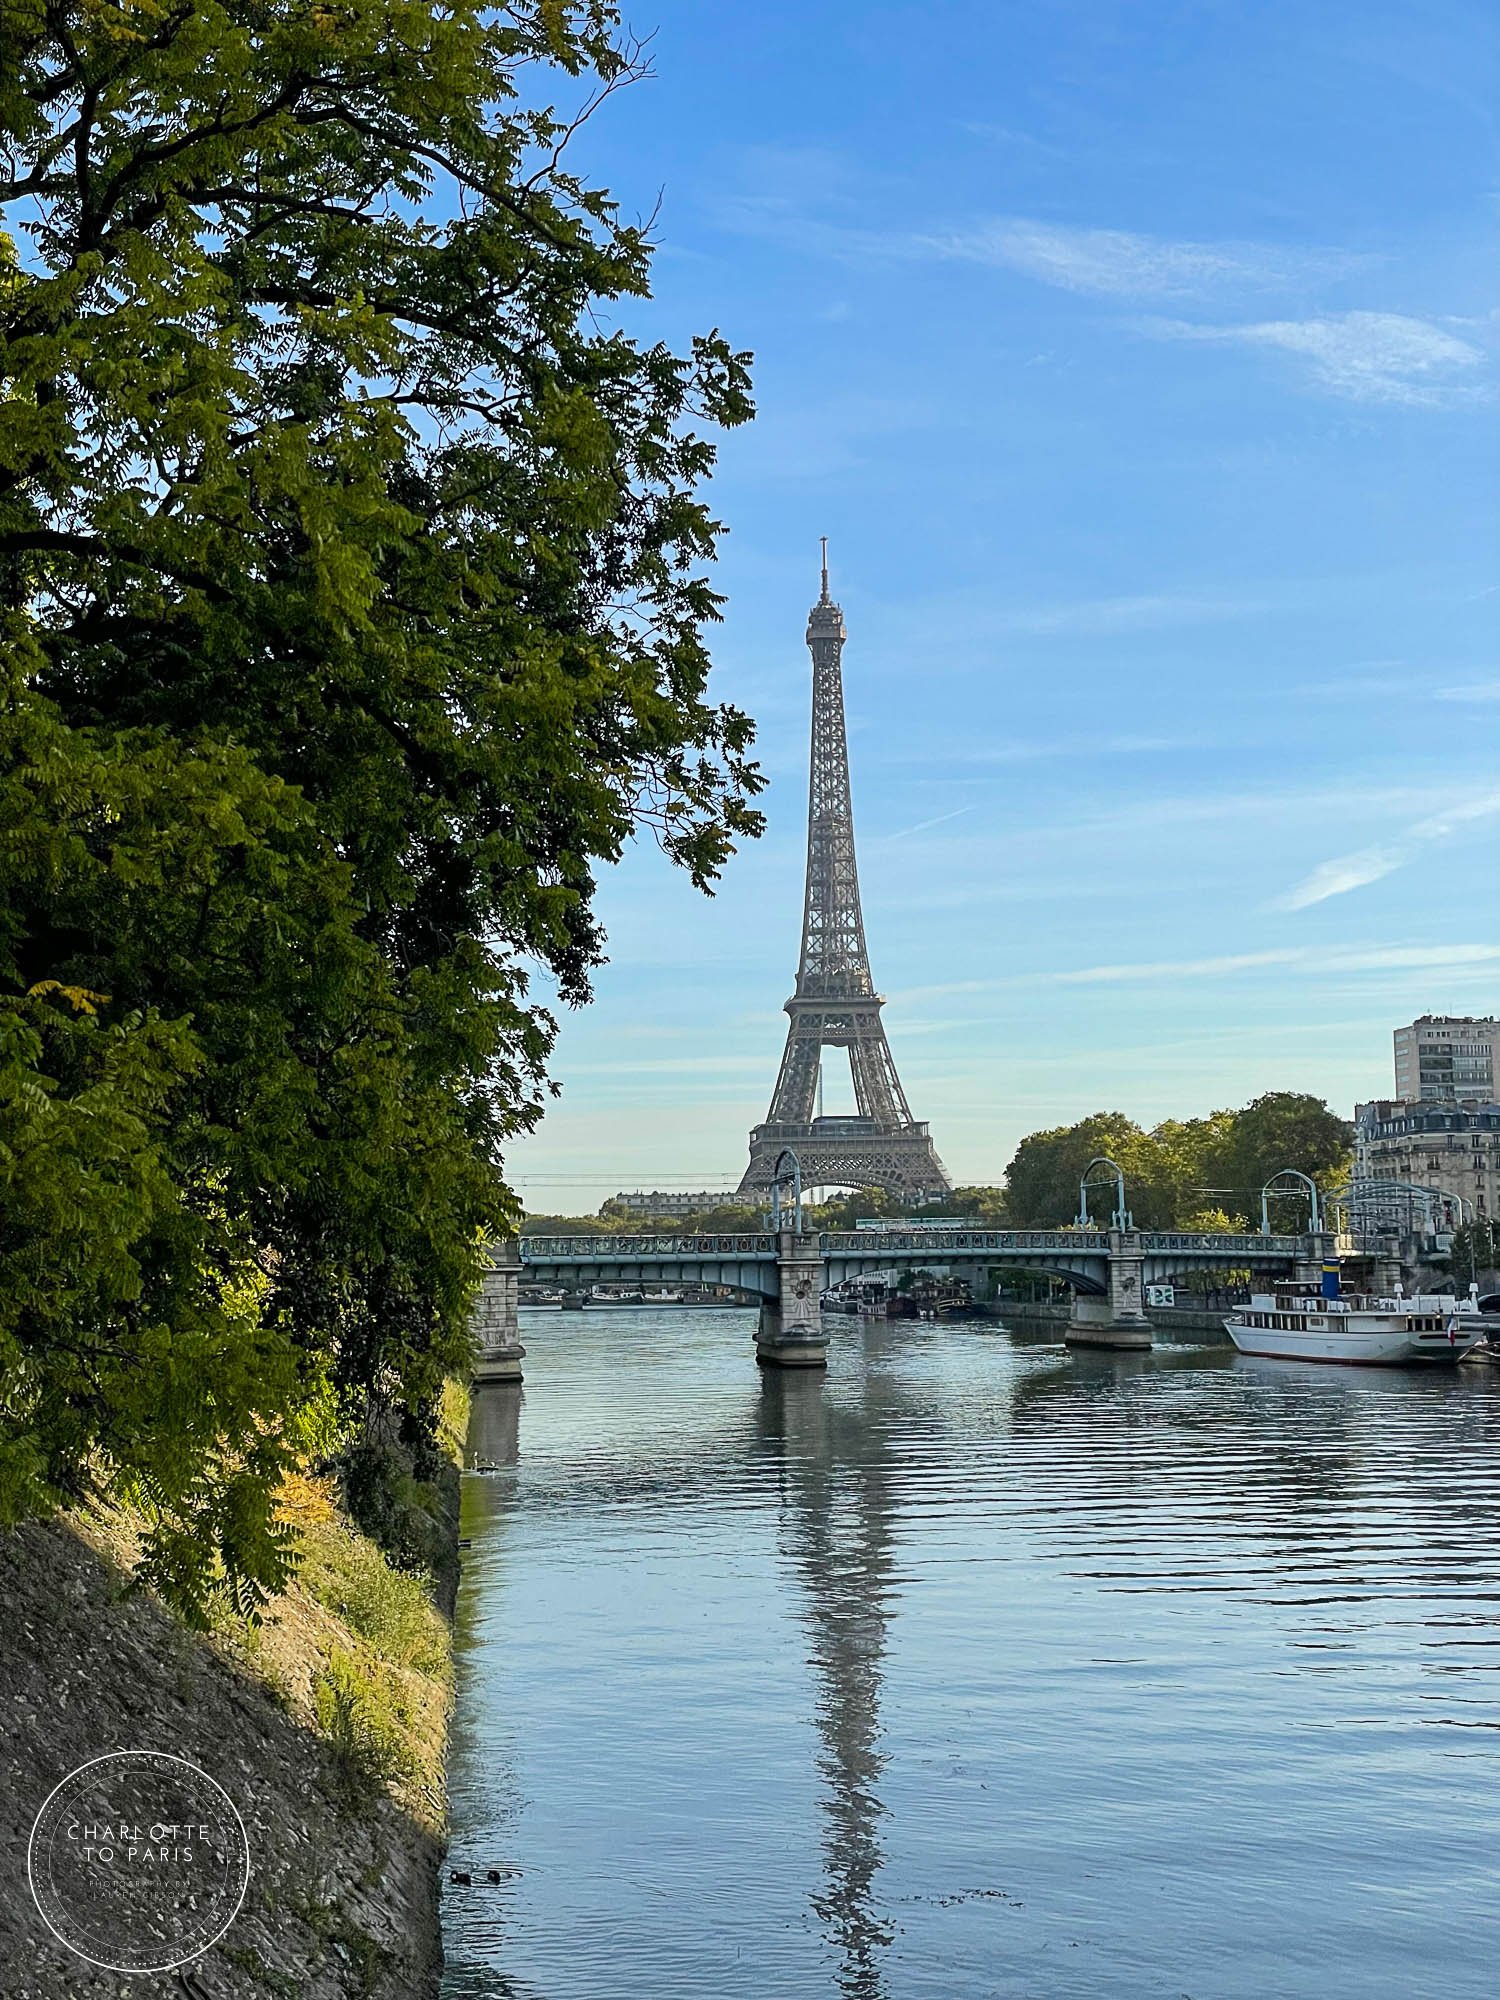 The Ile aux Cygnes, a hidden Paris island with views of the Eiffel Tower